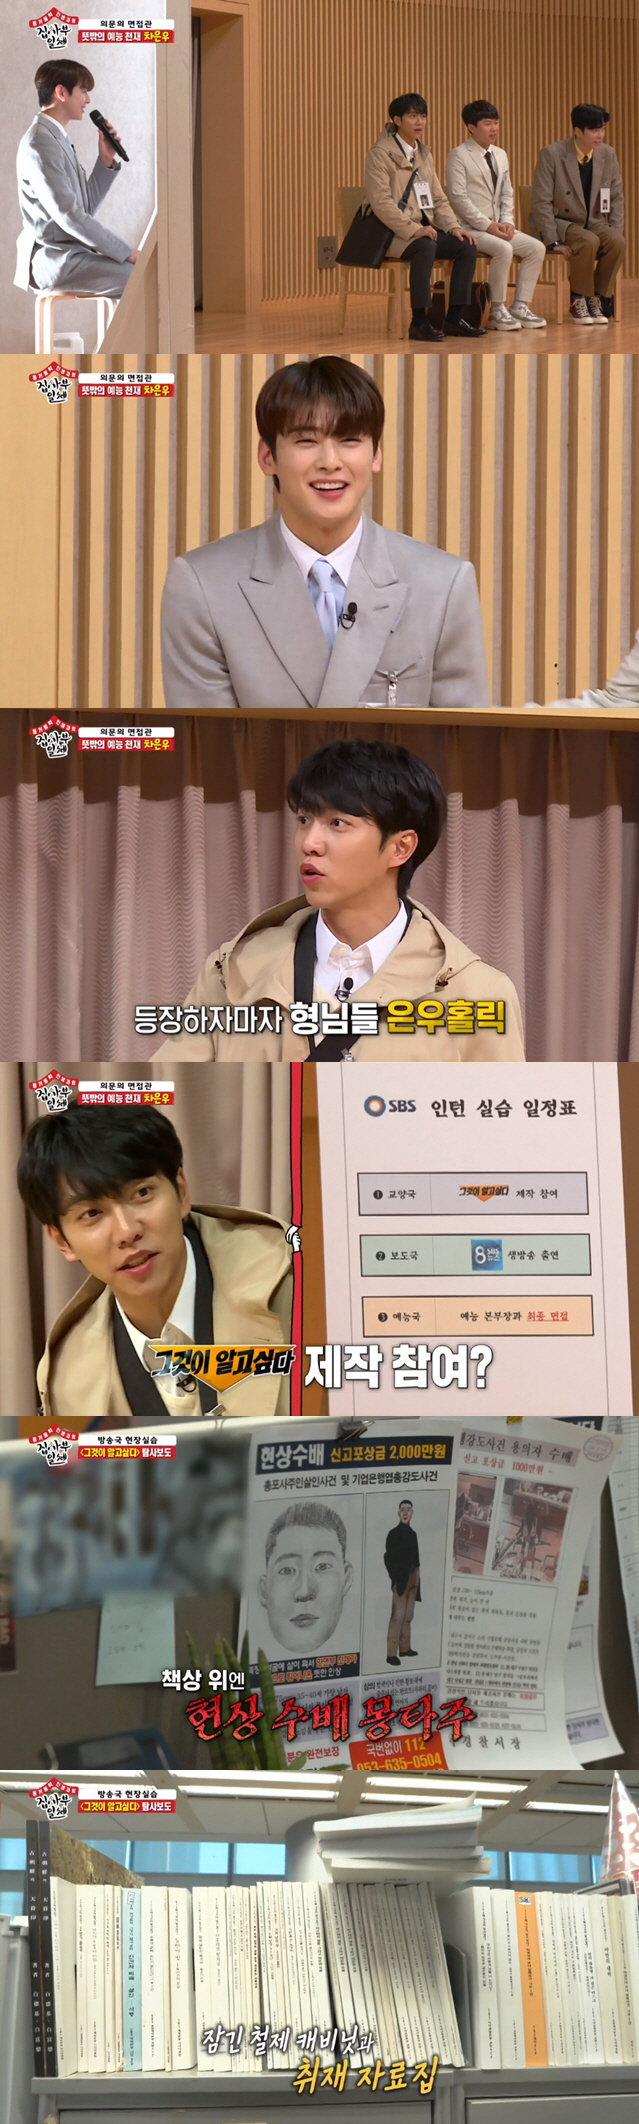 All The Butlers members have collaborated with SBSs signboard programs.SBS All The Butlers broadcasted on the 19th was decorated with Broadcast Station 24 oclock special which is held on SBS broadcasting station.On this day, Lee Seung-gi, Shin Sung-rok and Yang Se-hyeong visited SBS broadcasting station, where they met daily disciples Cha Eun-woo and Kim Dong-Hyun.In particular, Cha Eun-woo, who appeared behind the blinds, surprised the members with his extraordinary visuals and gestures.Lee Seung-gi, who first saw Cha Eun-woos real life, laughed, saying, I was really handsome. I heard a lot of stories, but I did not know this was going to happen.Cha Eun-woo also made a fluent introduction to English language and was surprised to find that he had also been a student president in the third place in school during his school days.The five members went on to practice SBS interns.We will pick up just one Super Rookie, and one will provide gifts to actual Super Rookie, such as business laptops and mobile phones, the production team said.The first step was a written test, and the members who saw the actual SBS issue fell into a menbung due to difficult difficulty.After participating in the field training of the broadcasting station, he participated in the production of It wants to know and performed live broadcast of SBS 8 News.First, the members who visited SBS Cultural Center met with the production team of SBSs signboard culture program It Wants to Know and listened to the behind-the-scenes story vividly.The It Wants to Know office was full of on-site wanted sketches and reporters Ry houses, and the crew was also drawn to the scene where they were actually receiving a tip-off call, which caused tension.The members who saw this were surprised that they were more like an investigative agency than a broadcasting station.At this time, however, the members found a picture of model and actor Lee Young-jin on the desk of Bae Jung-hoon PD and attracted attention.Bae Jung-hoon PD, who is in public relationship with Lee Young-jin, was embarrassed when the situation unfolded.The members said, There is a montage on the desks of other PDs, and Lee Seung-gi said, Its a lover.But this picture was attached here, so it seemed like a sketch for some reason. Since then, members have also directly participated in the production process of It Wants to Know. The members interviewed Professor Lee Soo-jung, a Gal Goddess profiler.Professor Lee Soo-jung said, I have been with It wants to know for 20 years. I read quality Ry for criminal psychology advice, and I should give advice Ry to the production crew.Ry has recently begun to receive it, he said. The production team and I are constantly talking about the truth that should be revealed to this society.The members then met with Hyun Woo and Choi Hye-rim anchor of SBS 8 News in search of the news agency.The members were excited about the news that they were given the opportunity to participate directly in the live broadcast of SBS 8 News.The five members competed fiercely with the final one to participate directly in the live broadcast.First, we conducted an announcing test, and Cha Eun-woo and Lee Seung-gi did it perfectly.Hyun Woo praised Lee Seung-gi for being close to the most newstone; he also said of Cha Eun-woo, with a bad voice.Its a good voice tone when you give me good news, he said.Lee Seung-gi made a perfect success in the following sports news article memorizing and reporting mission.Eventually, Lee Seung-gi was to broadcast sports news, and Cha Eun-woo was to broadcast radio news; the rest of the members participated in the news production.Lee Seung-gi was given the task of replacing sports closings on behalf of announcers, and Lee Seung-gi appeared nervous ahead of live broadcasts.